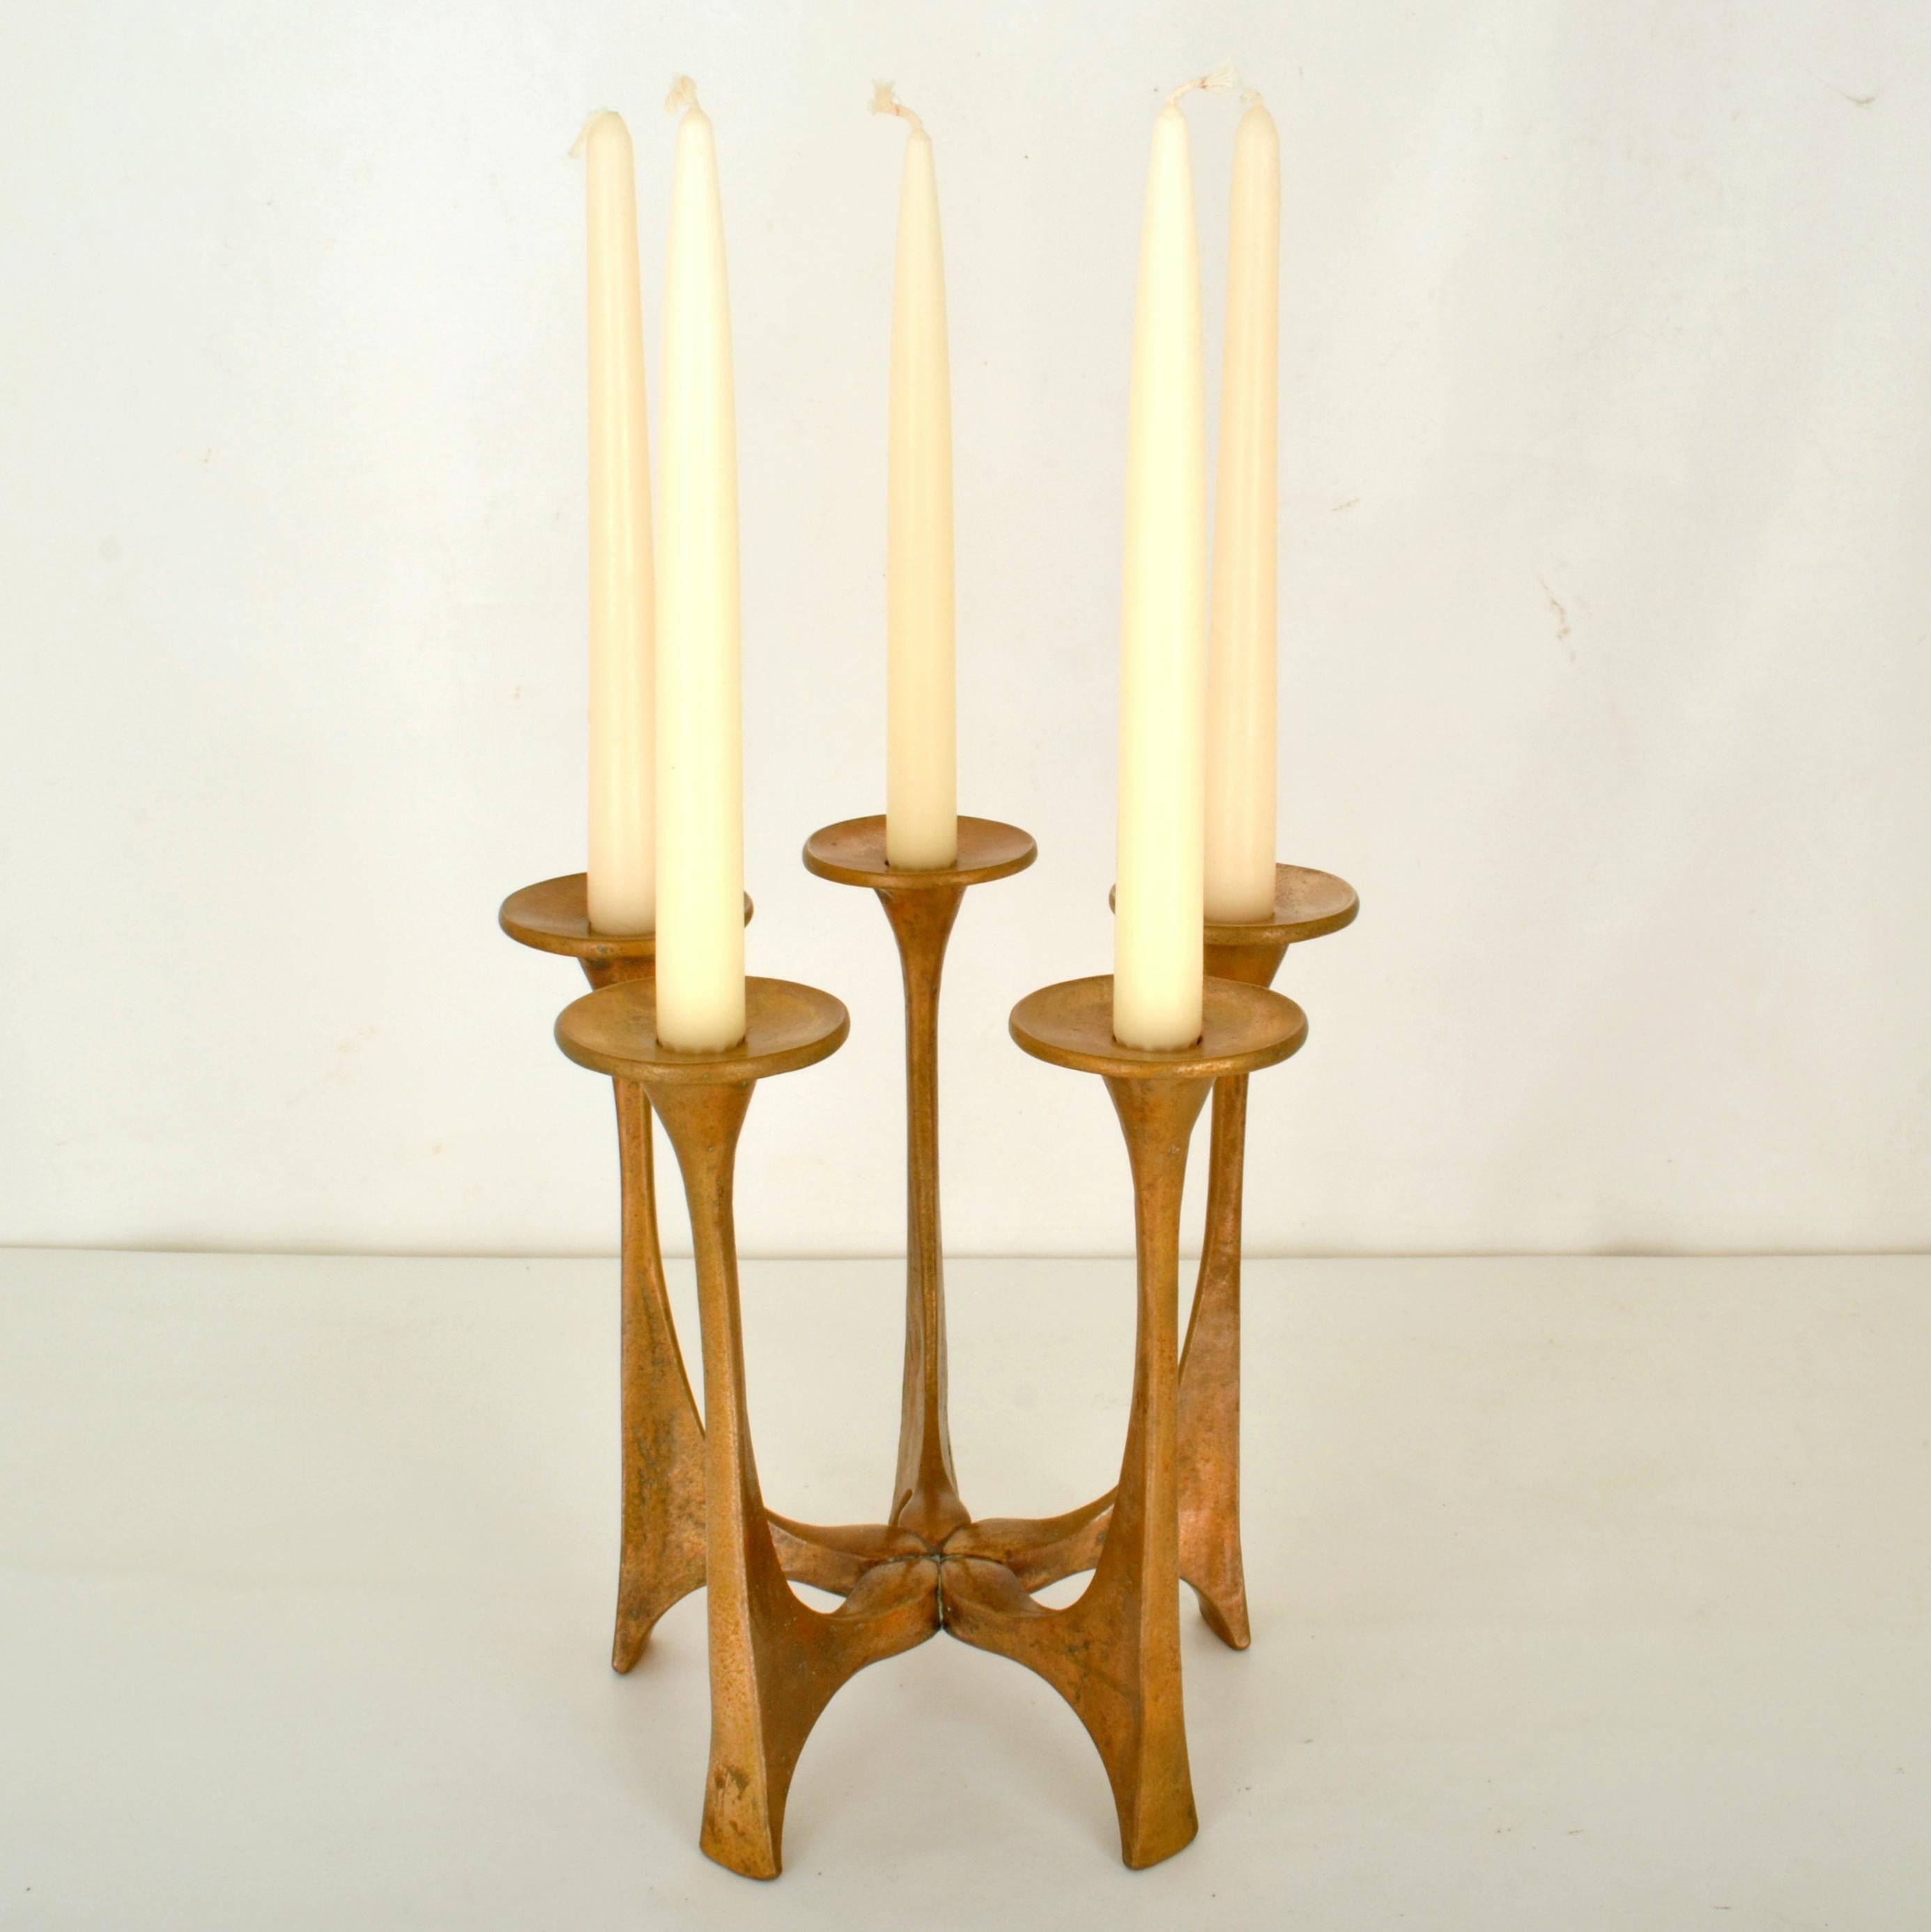 Bronze cast candelabra composed of five radiating cast-bronze arms with saucer shaped candle holders for regular candles. It is designed by Michael Harjes (1926-2006) and produced by Harjes Metalkunst (1912), the family business in Germany. The